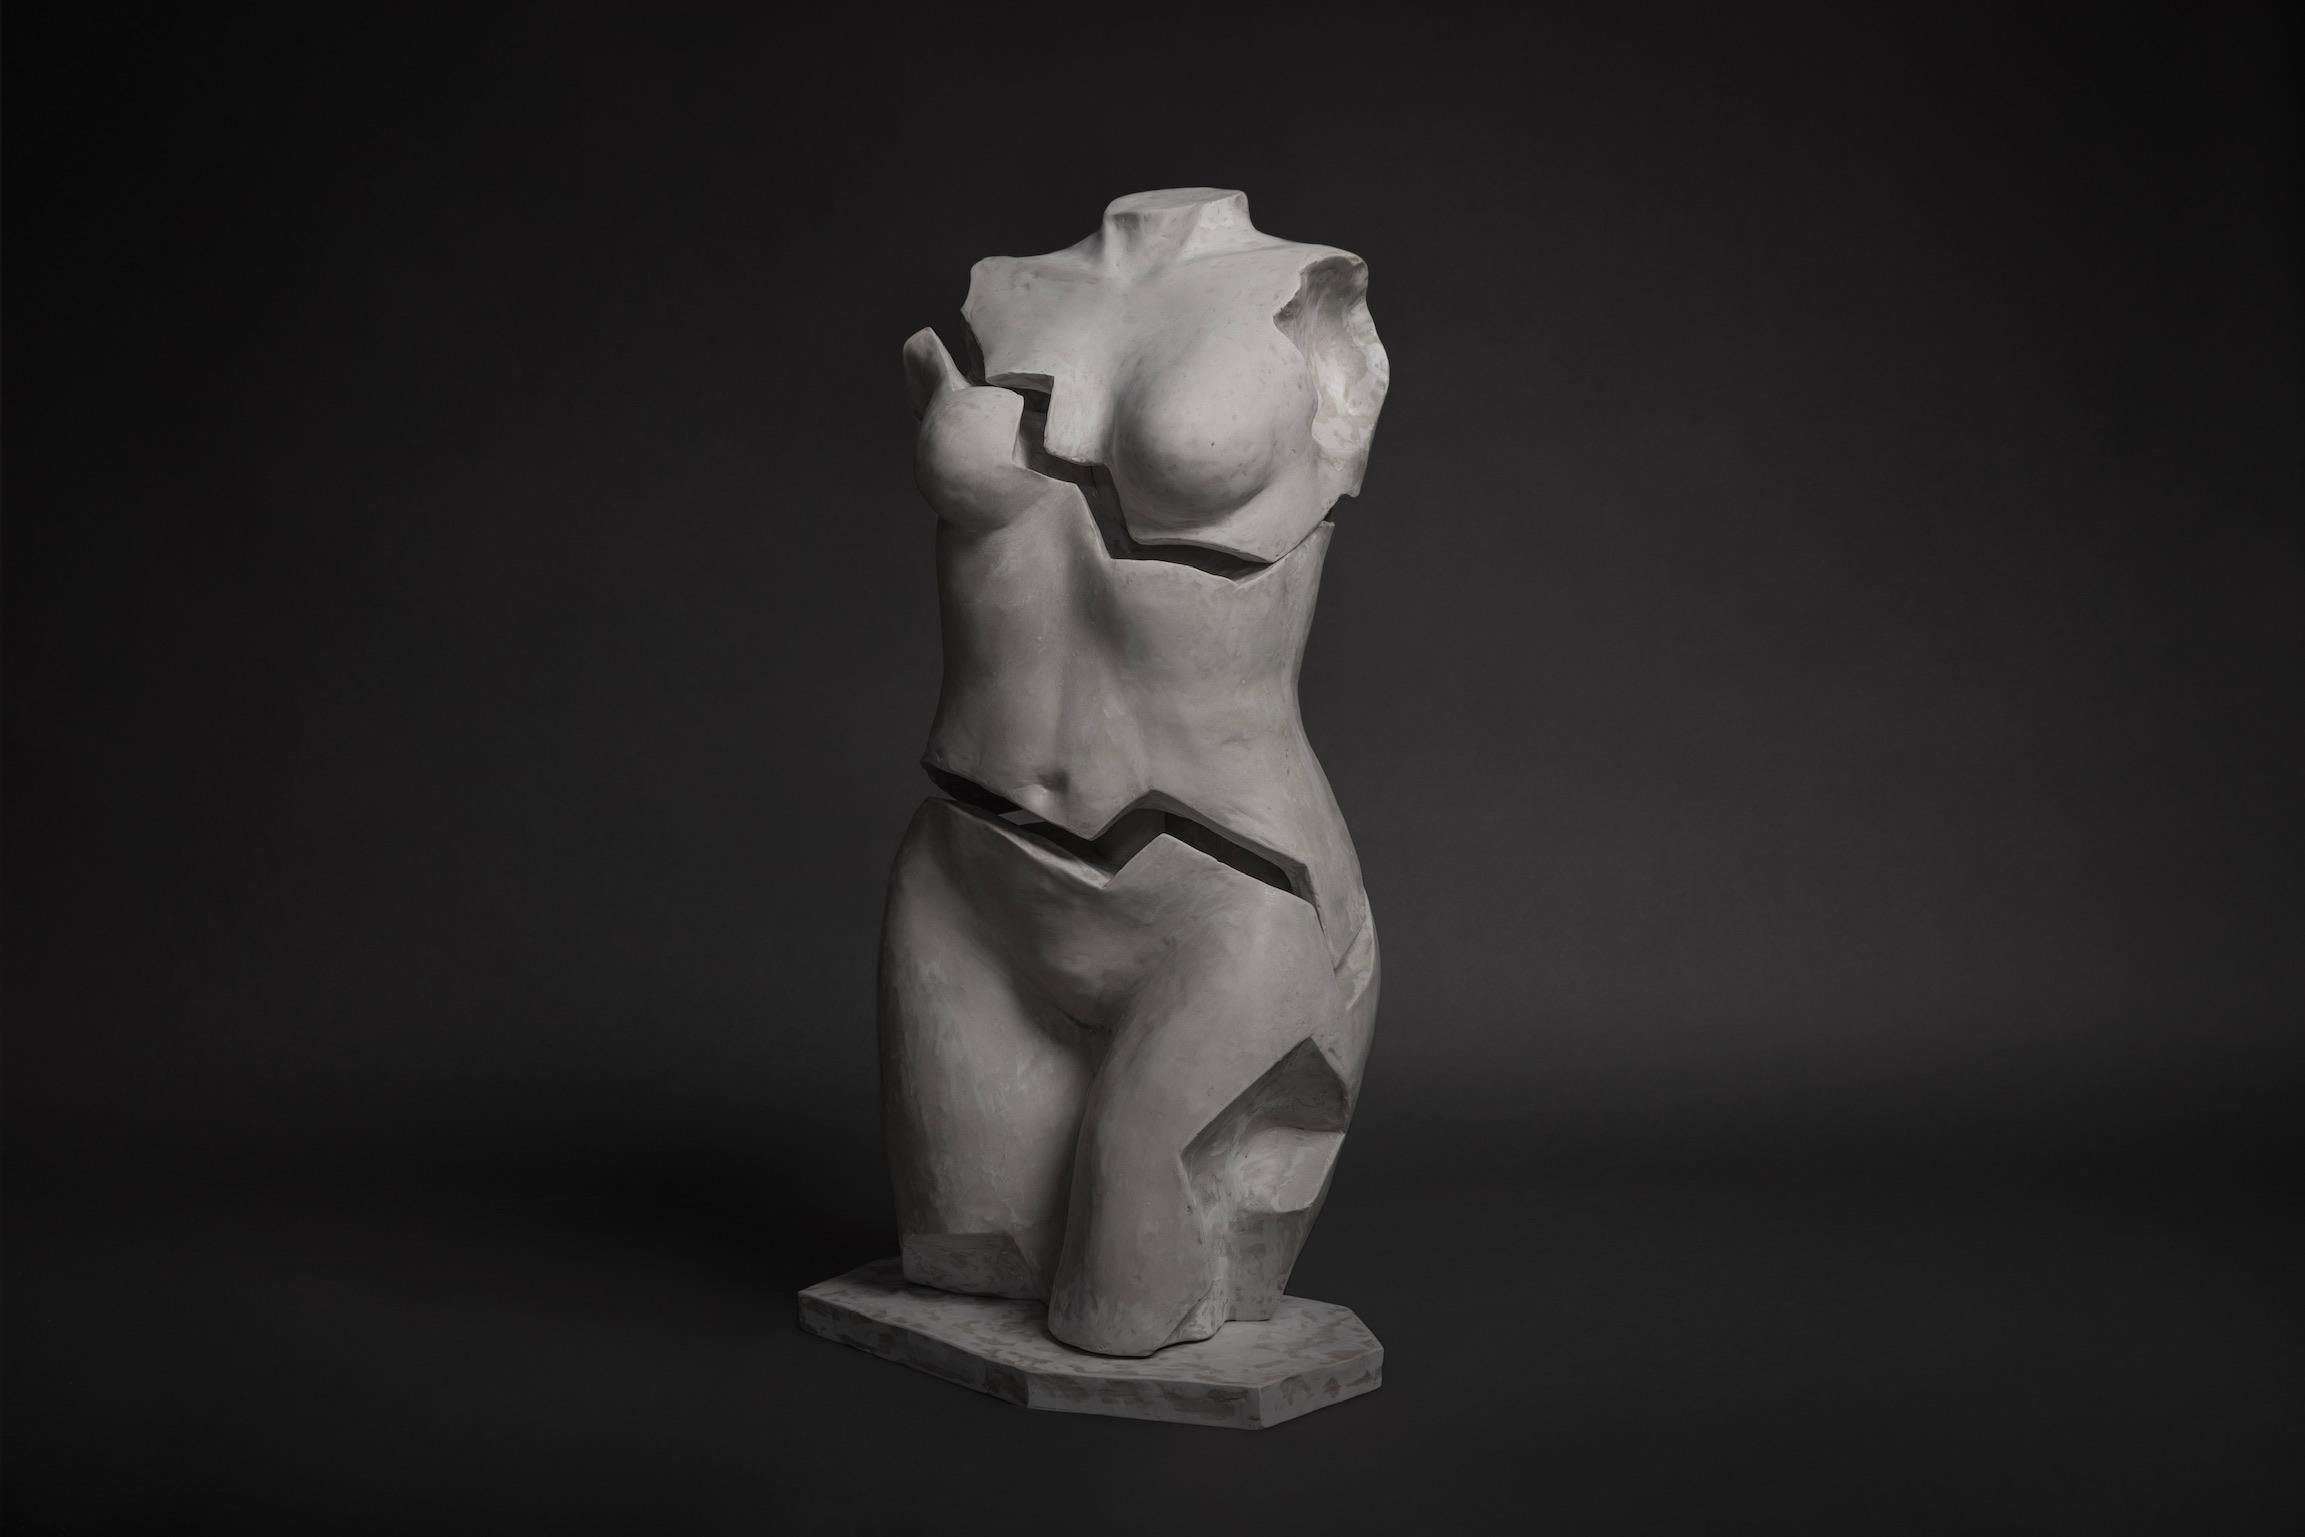 In continuity with her signature explorations of the female form, Marcela Cure introduces a new sculptural memento that sheds light upon the mulling yet beauteous intricacies in womanhood. Through hand-sculpted and hand-cast fragments that yield an